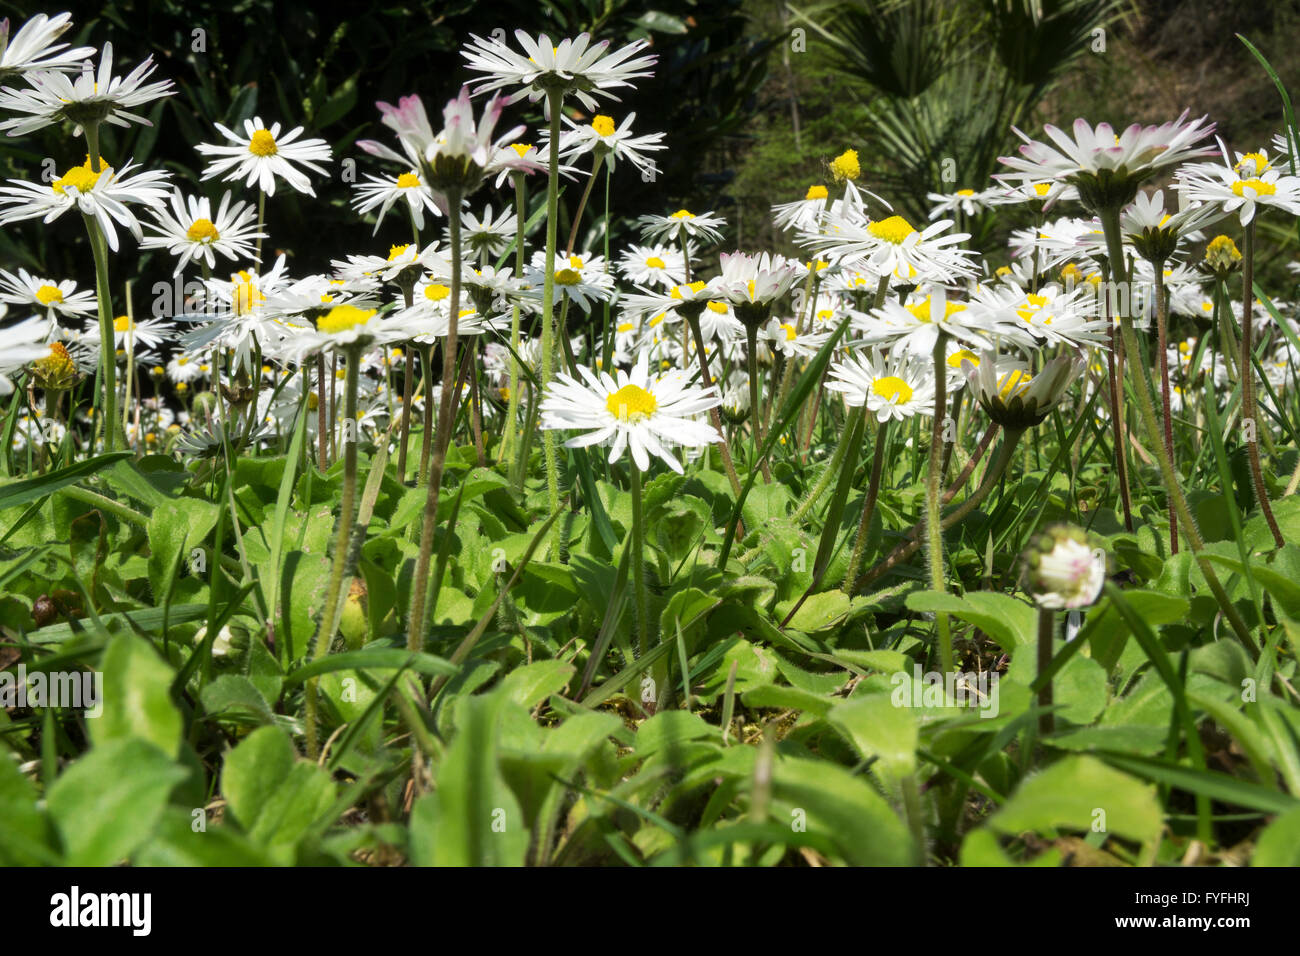 Common daisies, also English or lawn daisies (Bellis perennis), worm's-eye view, Baden-Württemberg, Germany Stock Photo